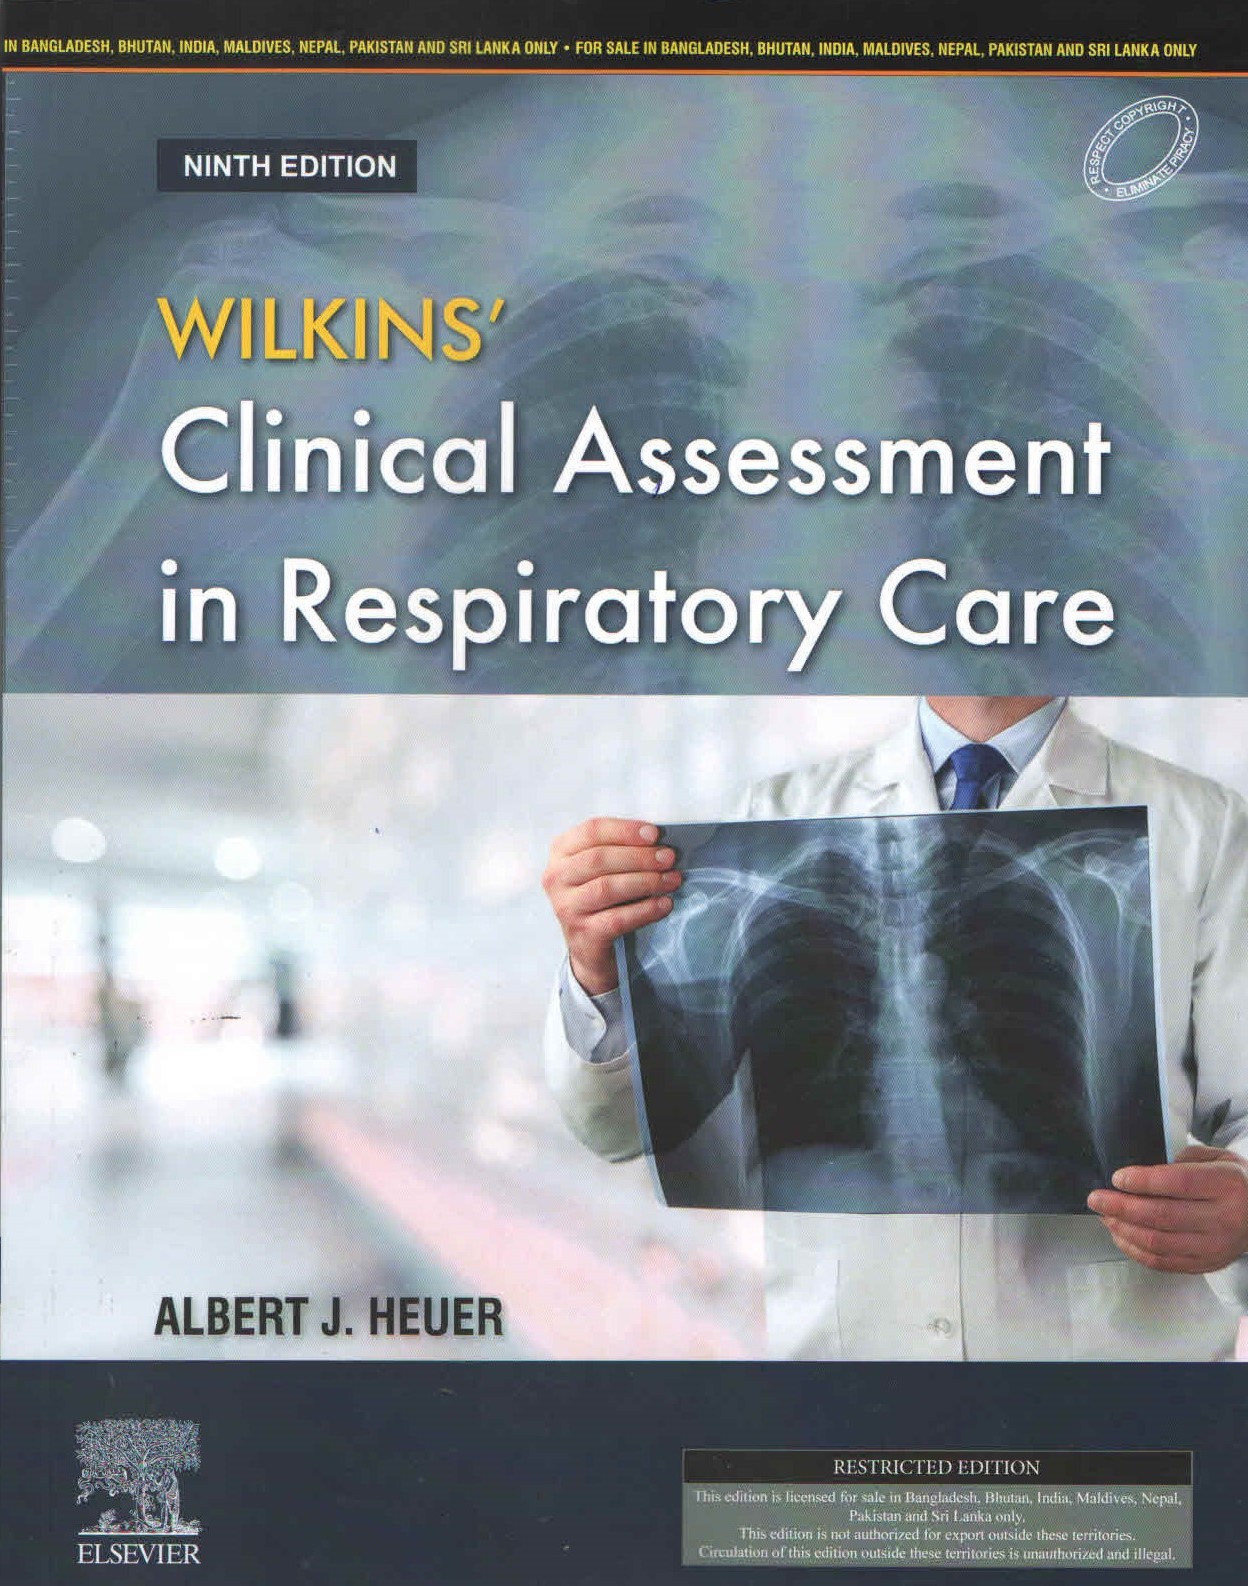 

exclusive-publishers/elsevier/wilkins--clinical-assessment-in-respiratory-care-9788131269534